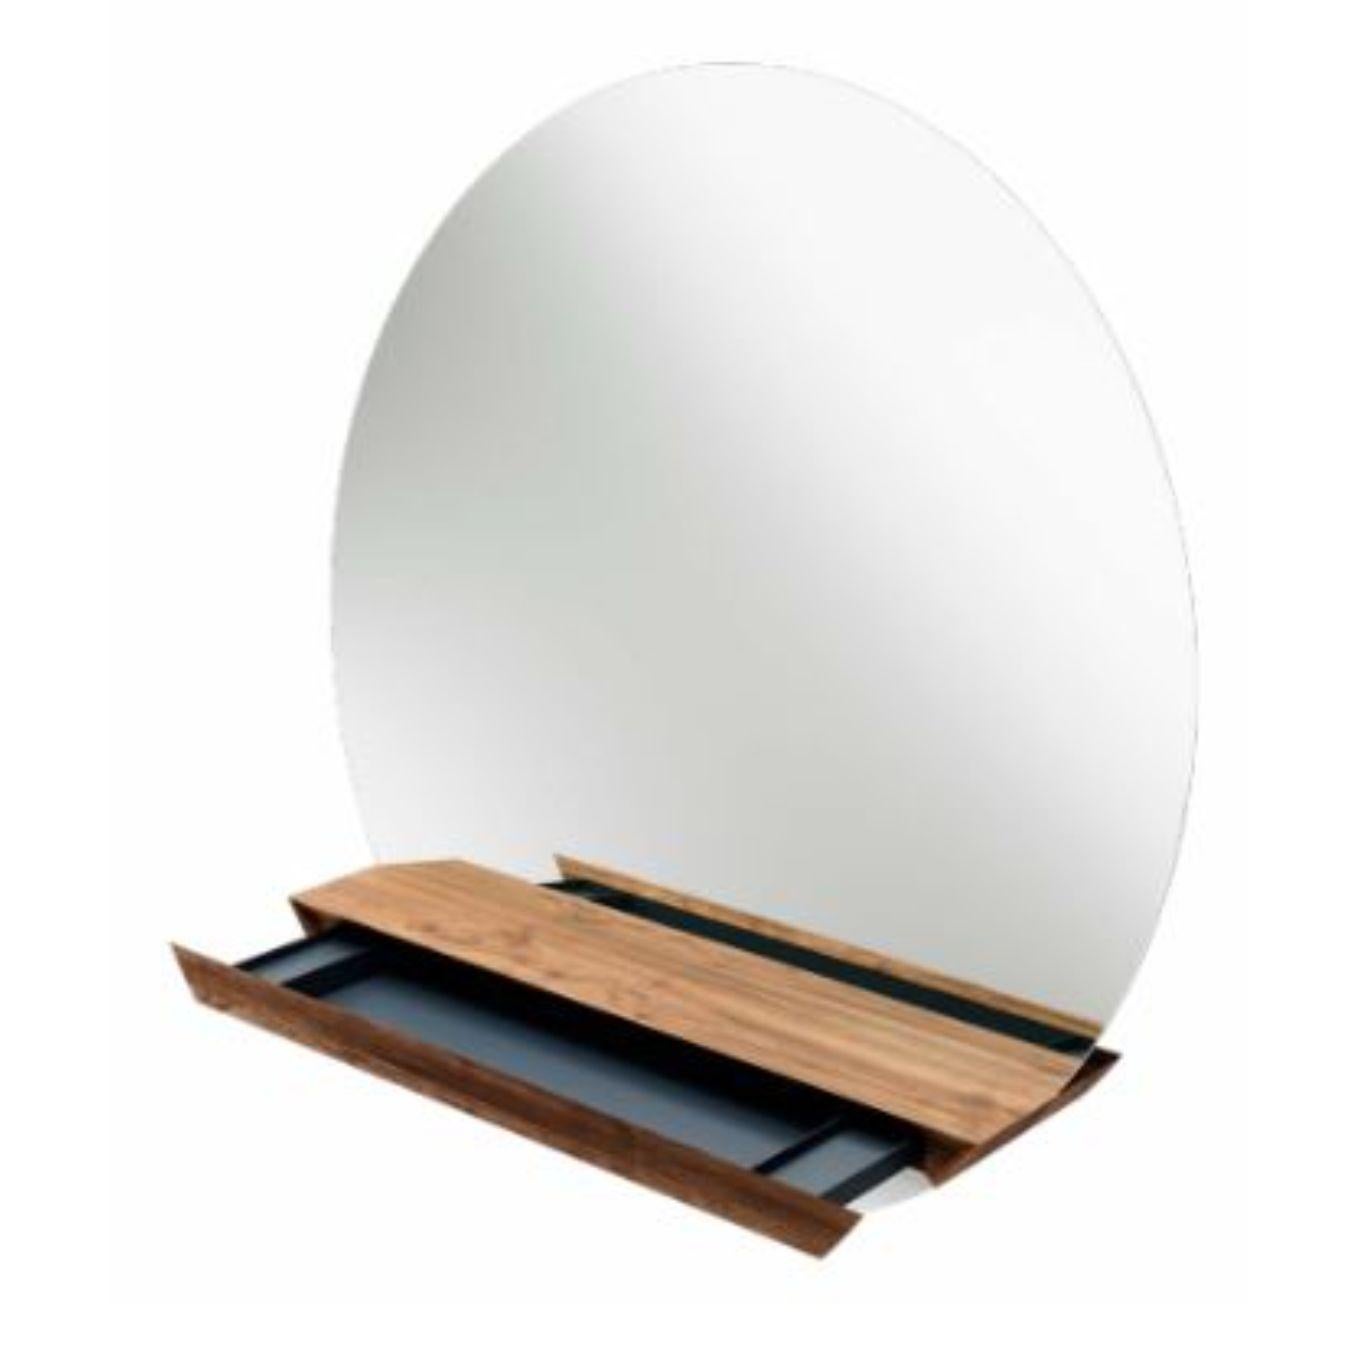 Walnut round guillotine mirror by Jeffrey Huyghe.
Dimensions: D 149.5 x W 149.5 x H 30 cm.
Materials: Walnut natural oiled, mirror.
Also available in different materials. 
 
Guillotine is designed with the idea in mind to keep your hallway